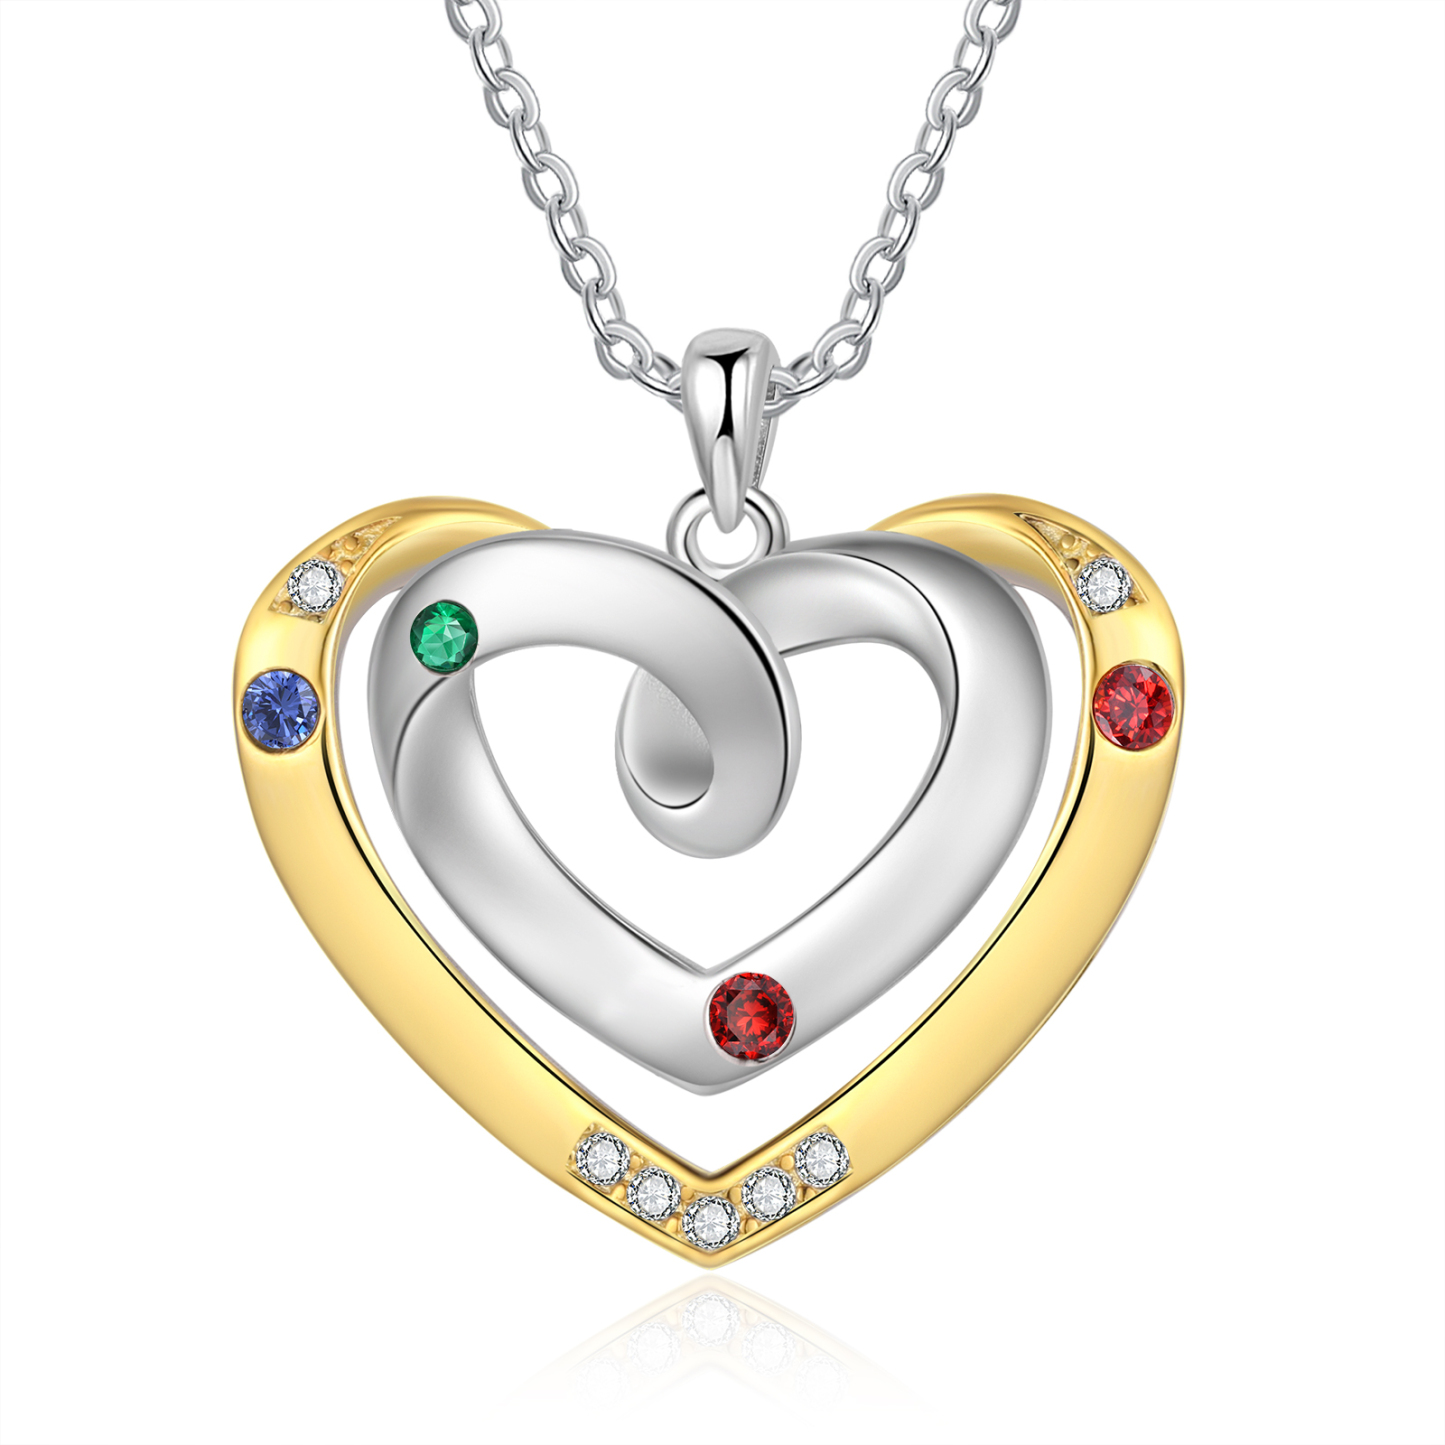 4 Names - Personalized Heart Necklace with Customized Names and Birthstone, A Perfect and Exquisite Gift for Her